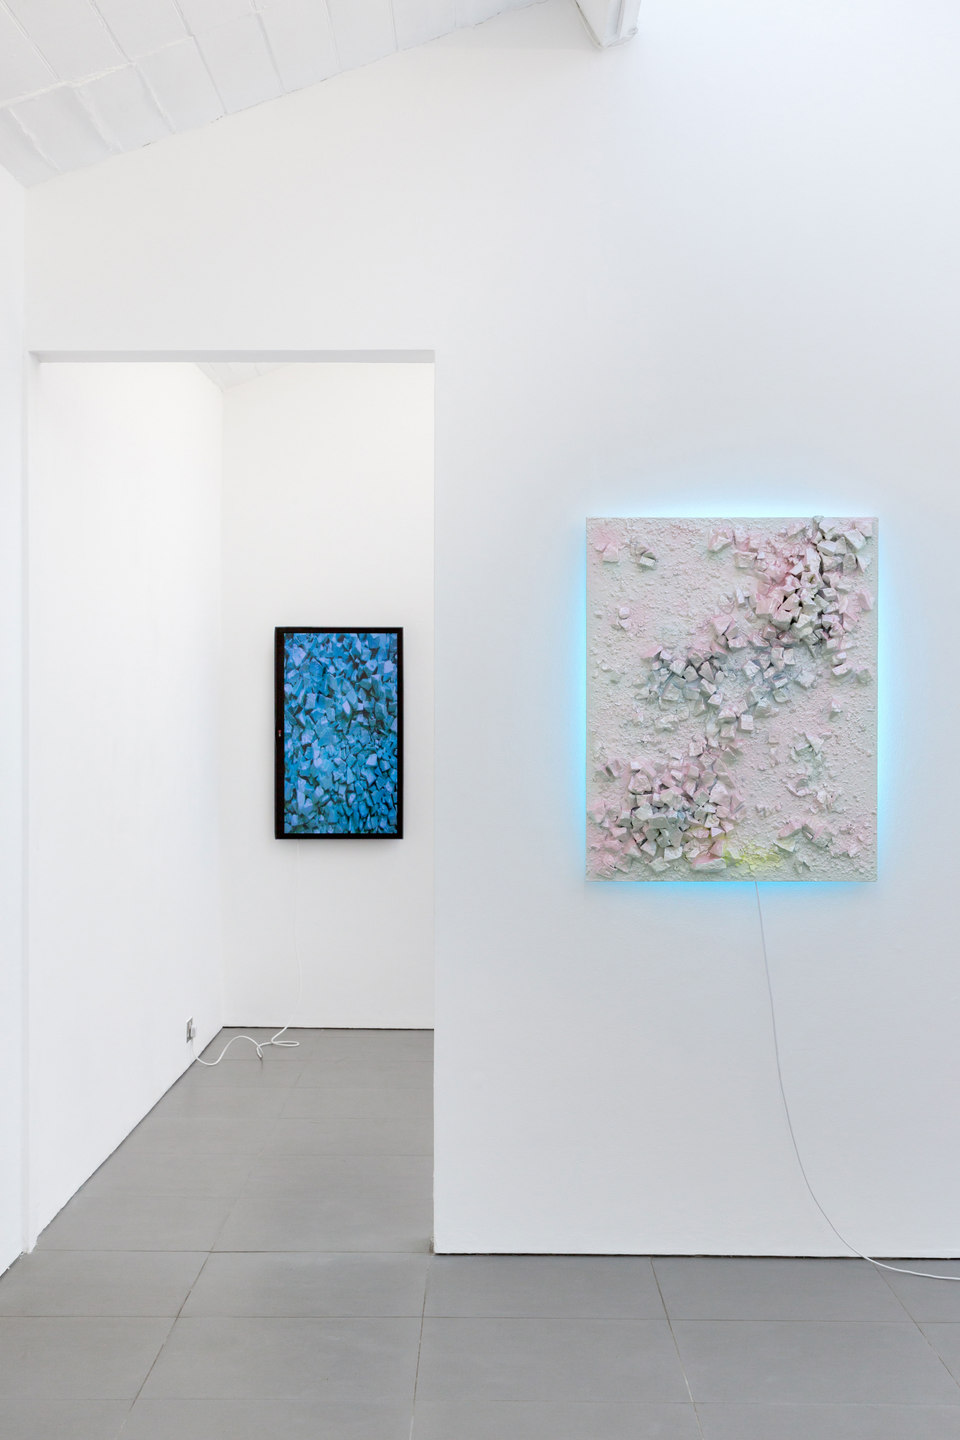 Adham Faramawy, left: Spa Day, 2013, video, duration: 9 minutes, right: Hi! I’m happy you’re here 1, 2014, plaster, jesmonite, spray paint, led light, (l. 100 cm x w. 80 cm), Cell Project Space, HYDRA, 2014